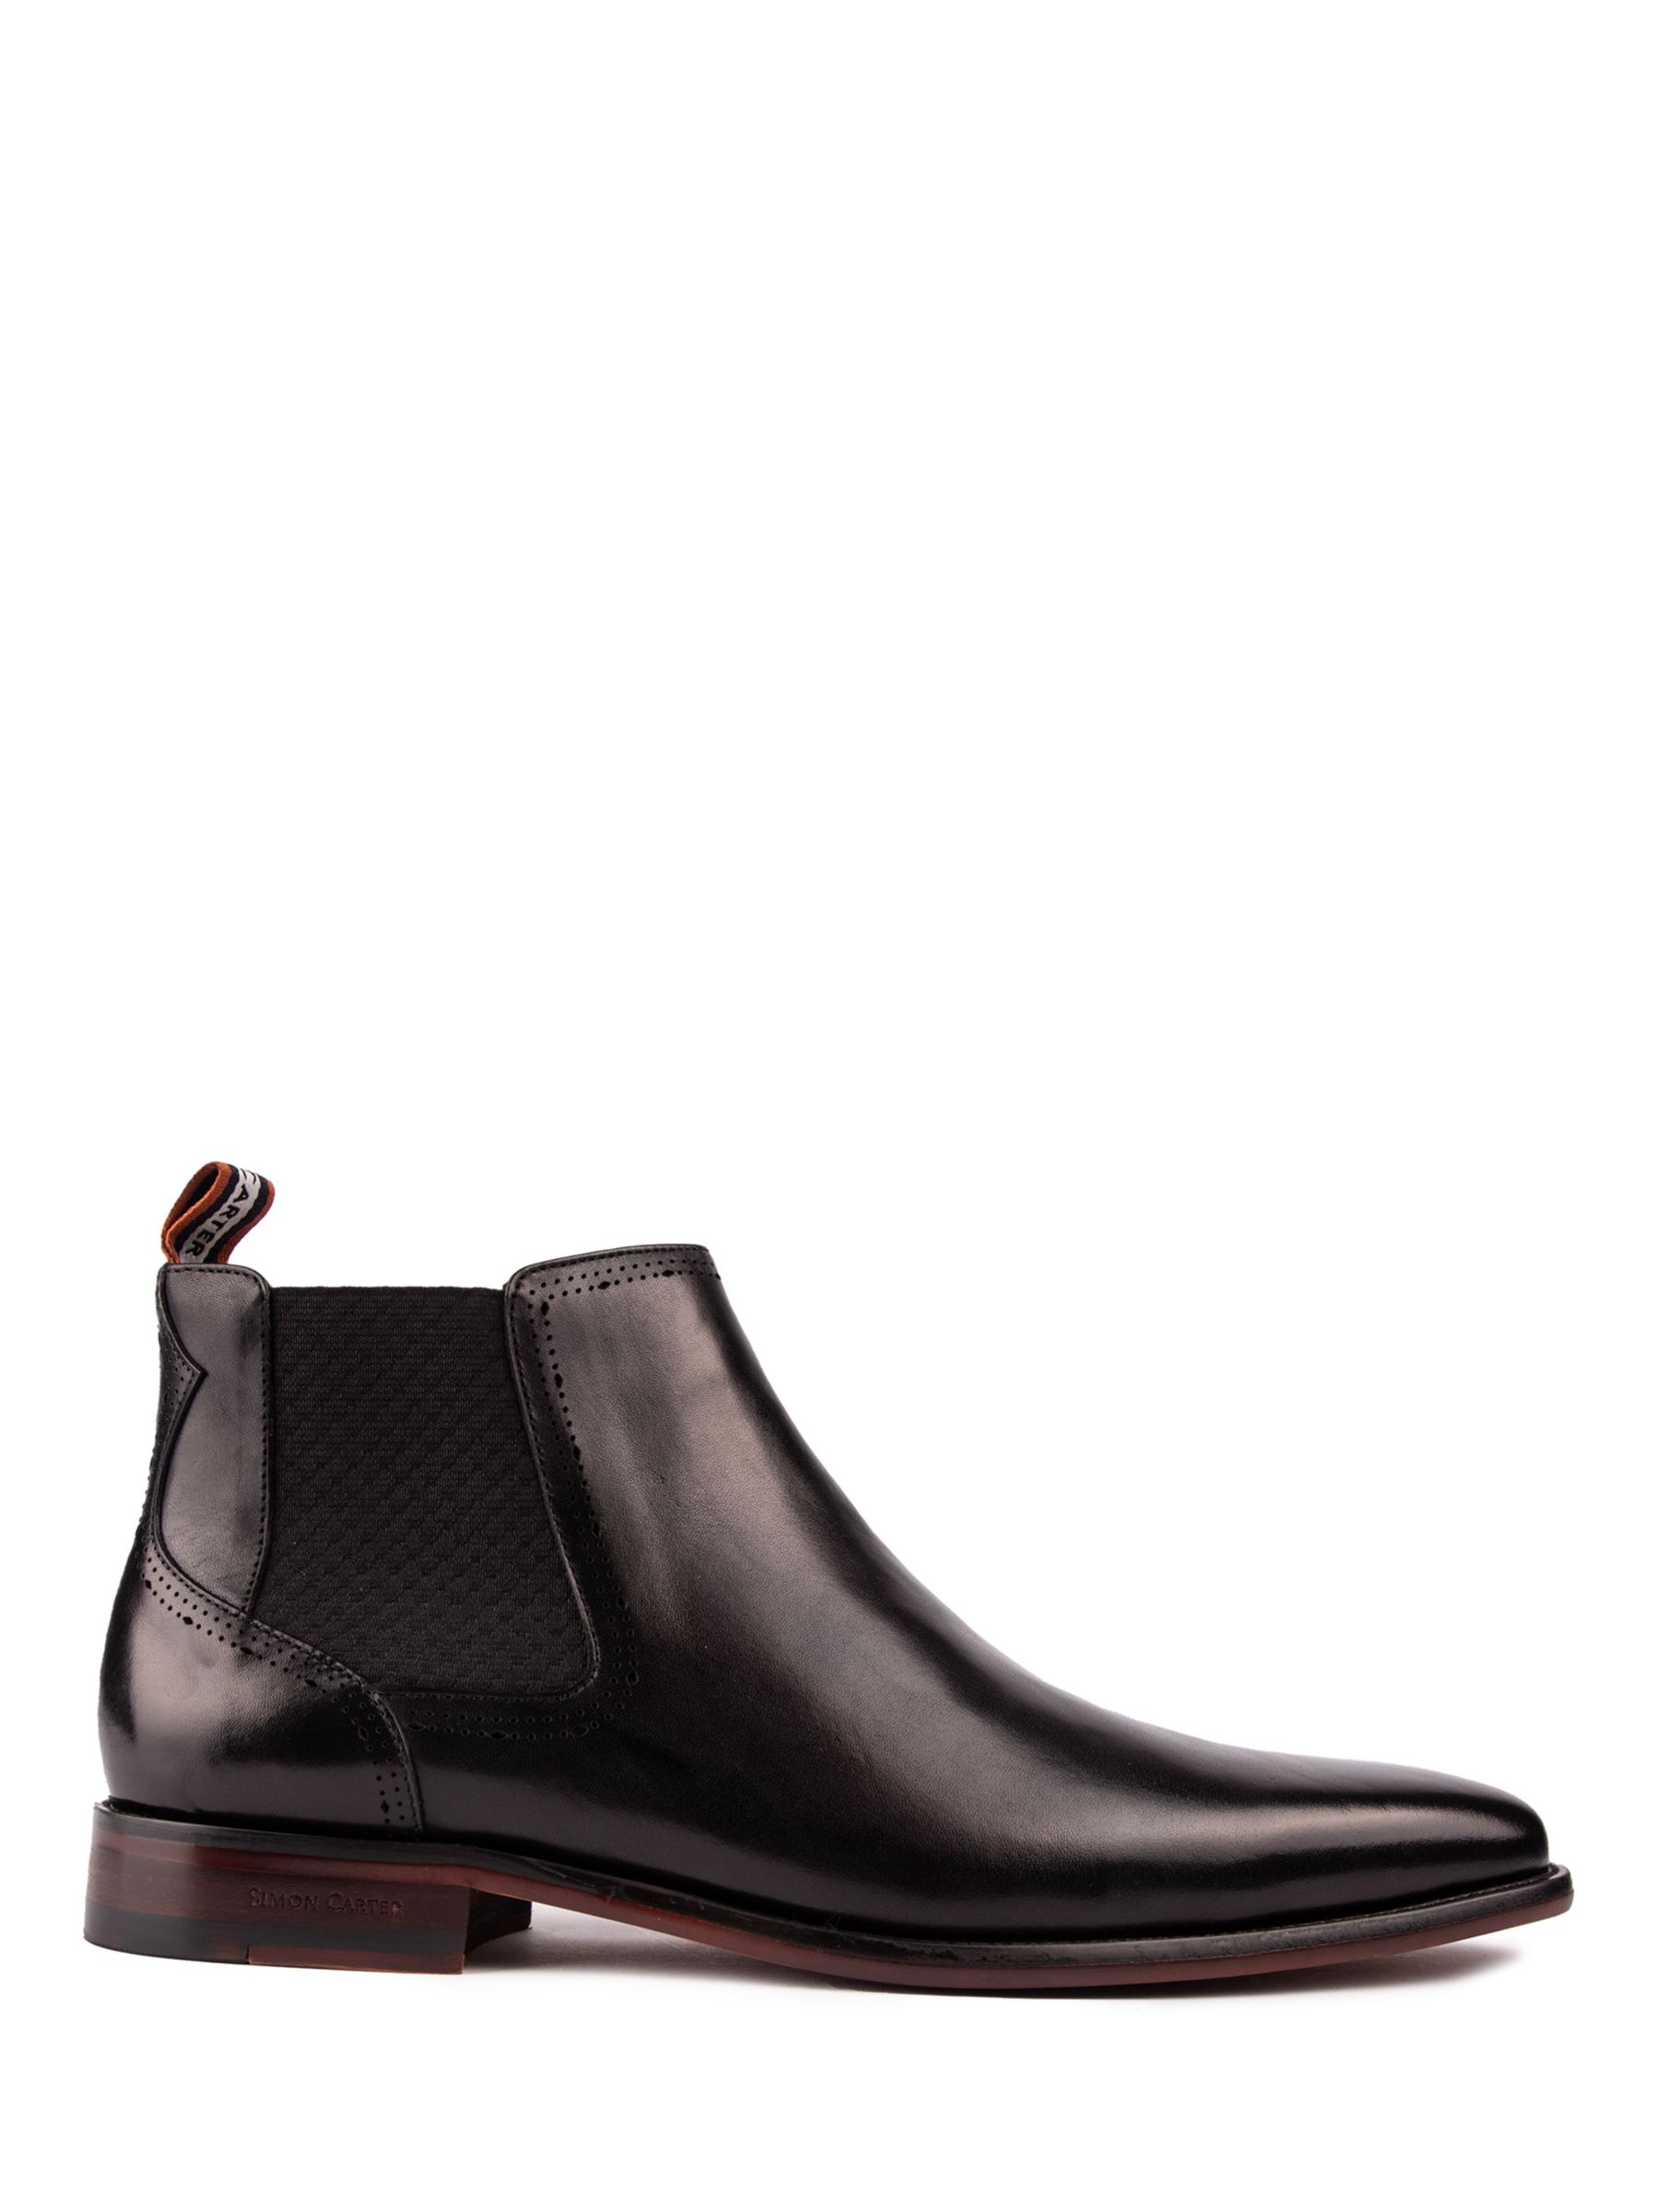 Simon Carter Astrex Leather Chelsea Boots, Black at John Lewis & Partners